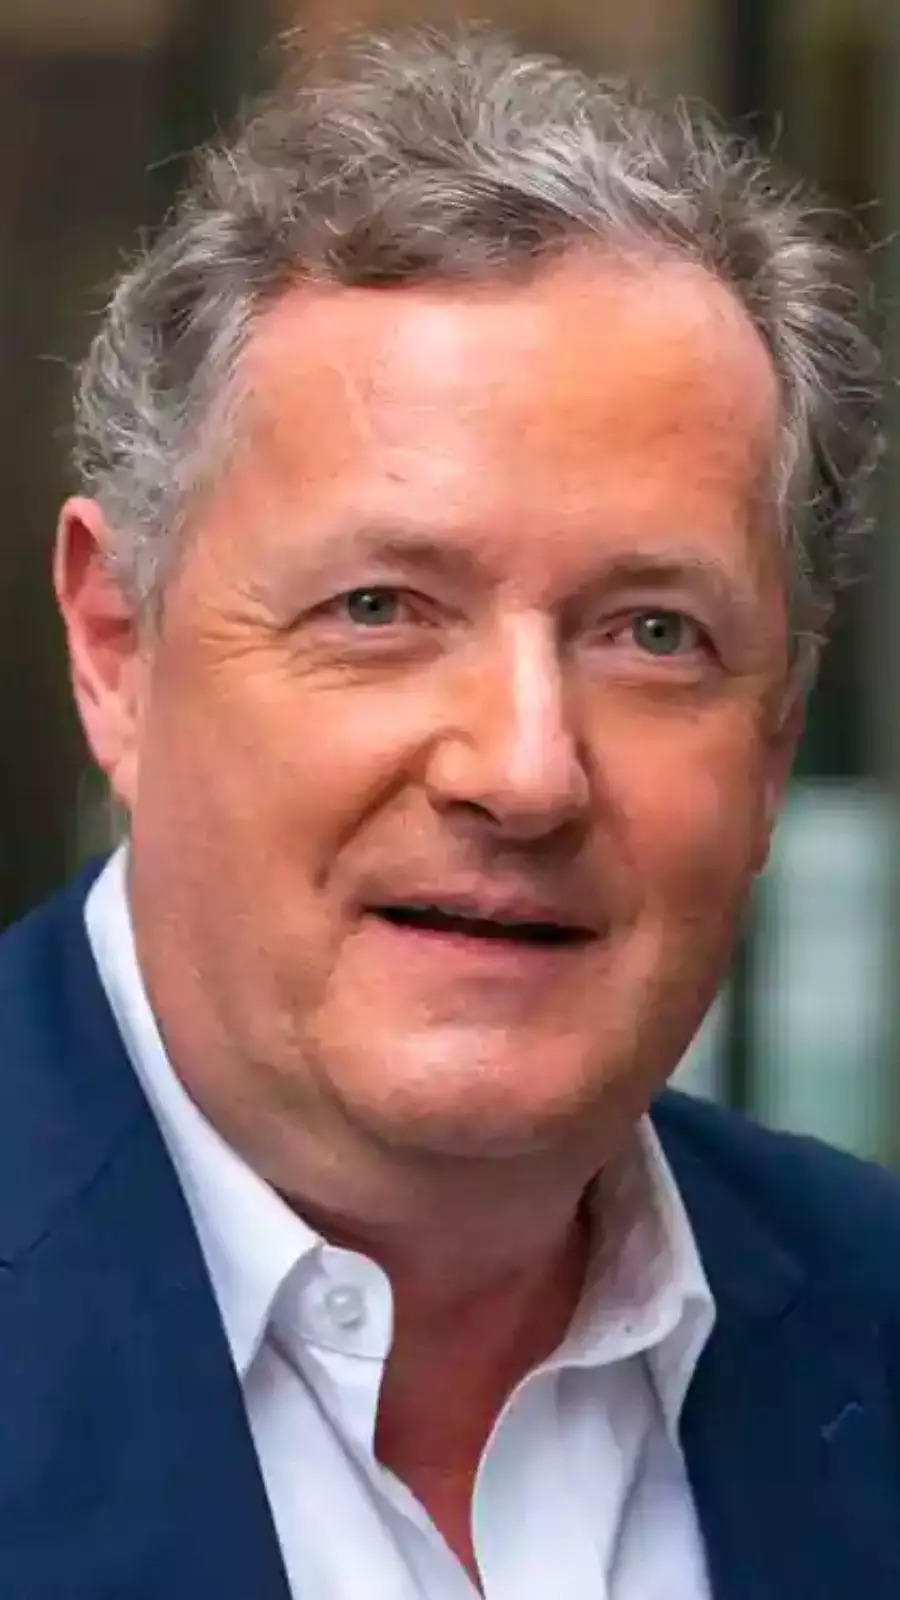 Andrew Tate becomes victim of death hoax as Piers Morgan's Twitter